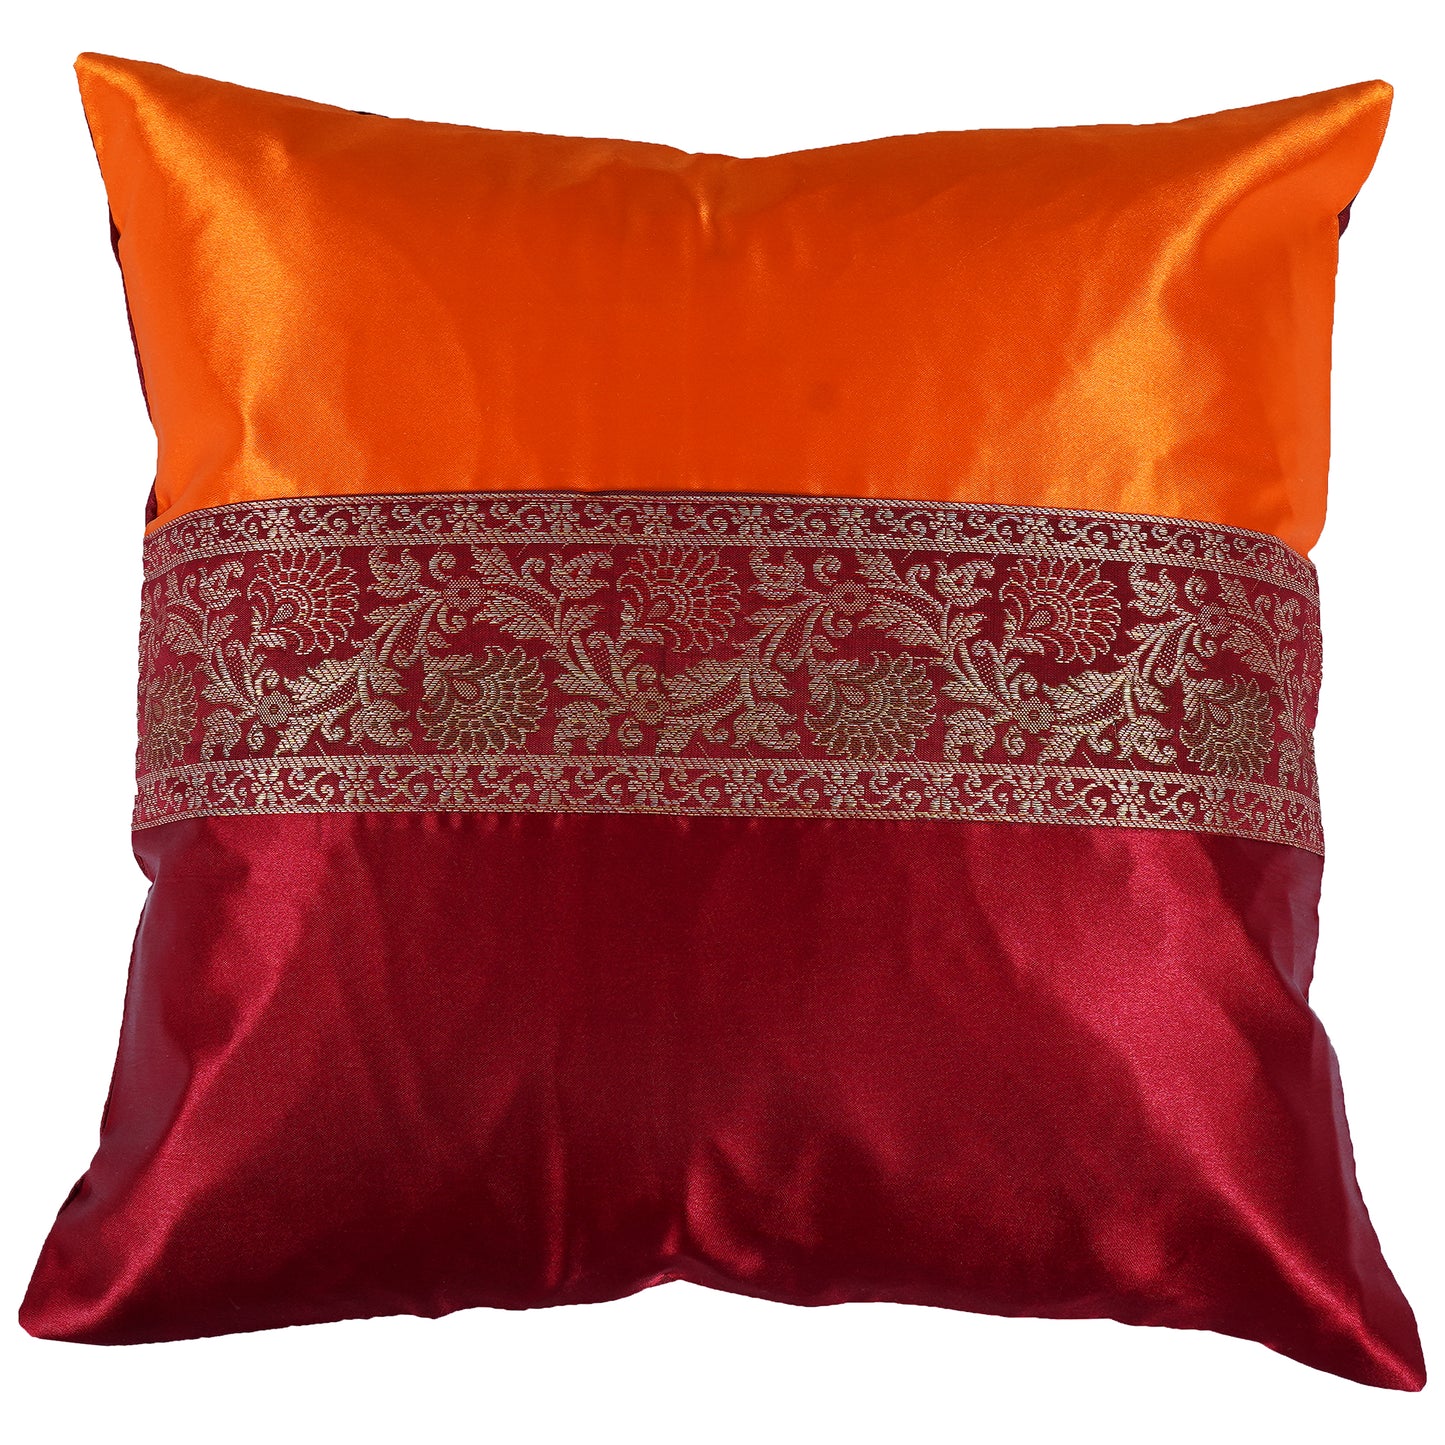 Set Of 2 Pc Indian Decorative Brocade Orange & Maroon Silky Satin Cushion Cover Square Throw Pillowcase for Couch Sofa Home Decor Ethnic Pillow Cover